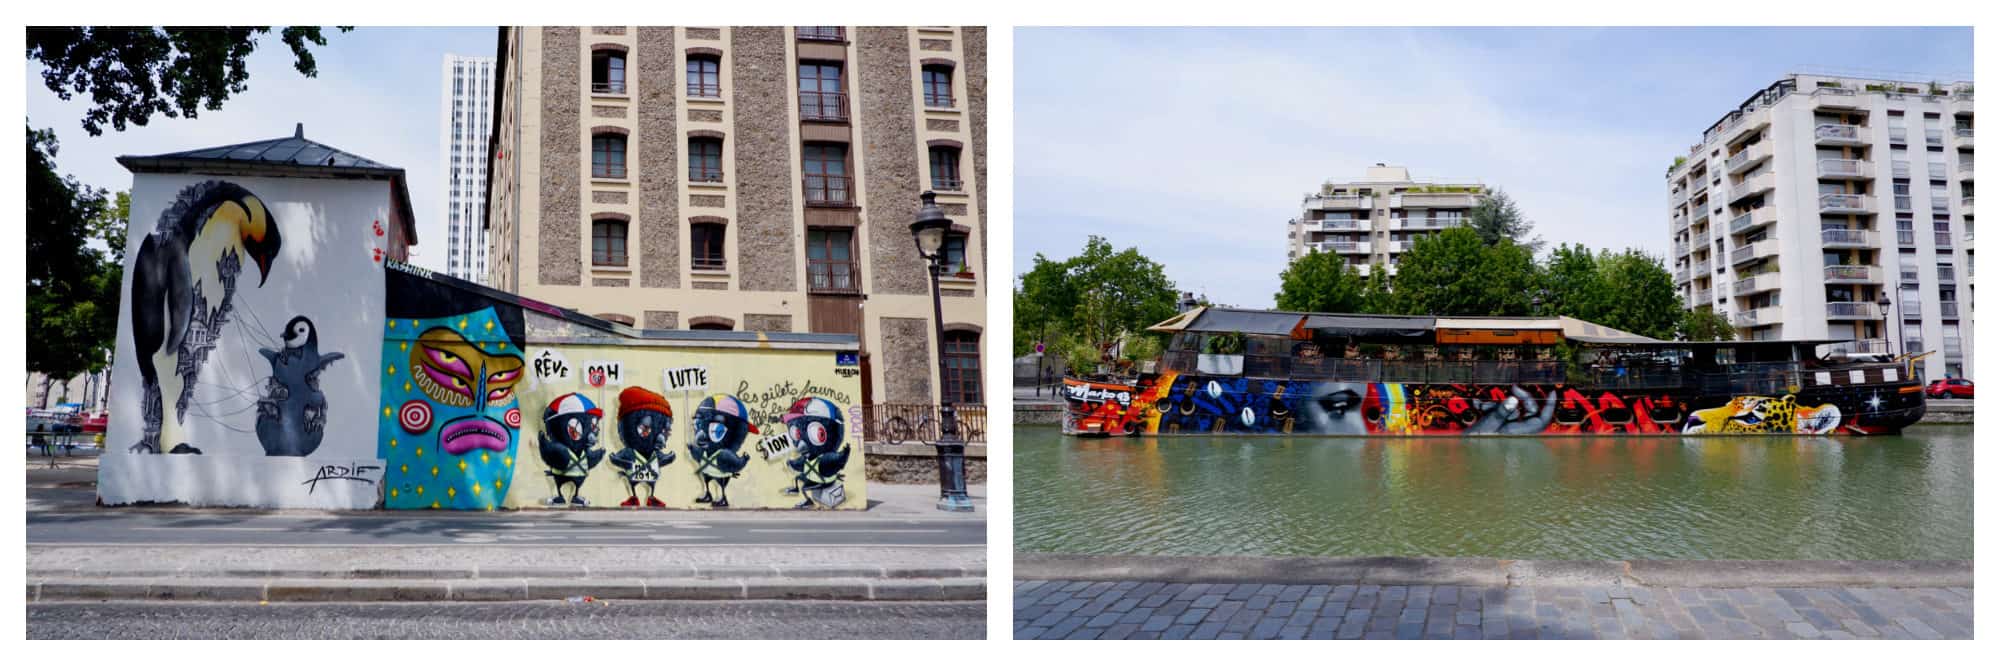 The bold and colorful street art along the canal (left) even extends to the barges (right), creates a unique ambiance.